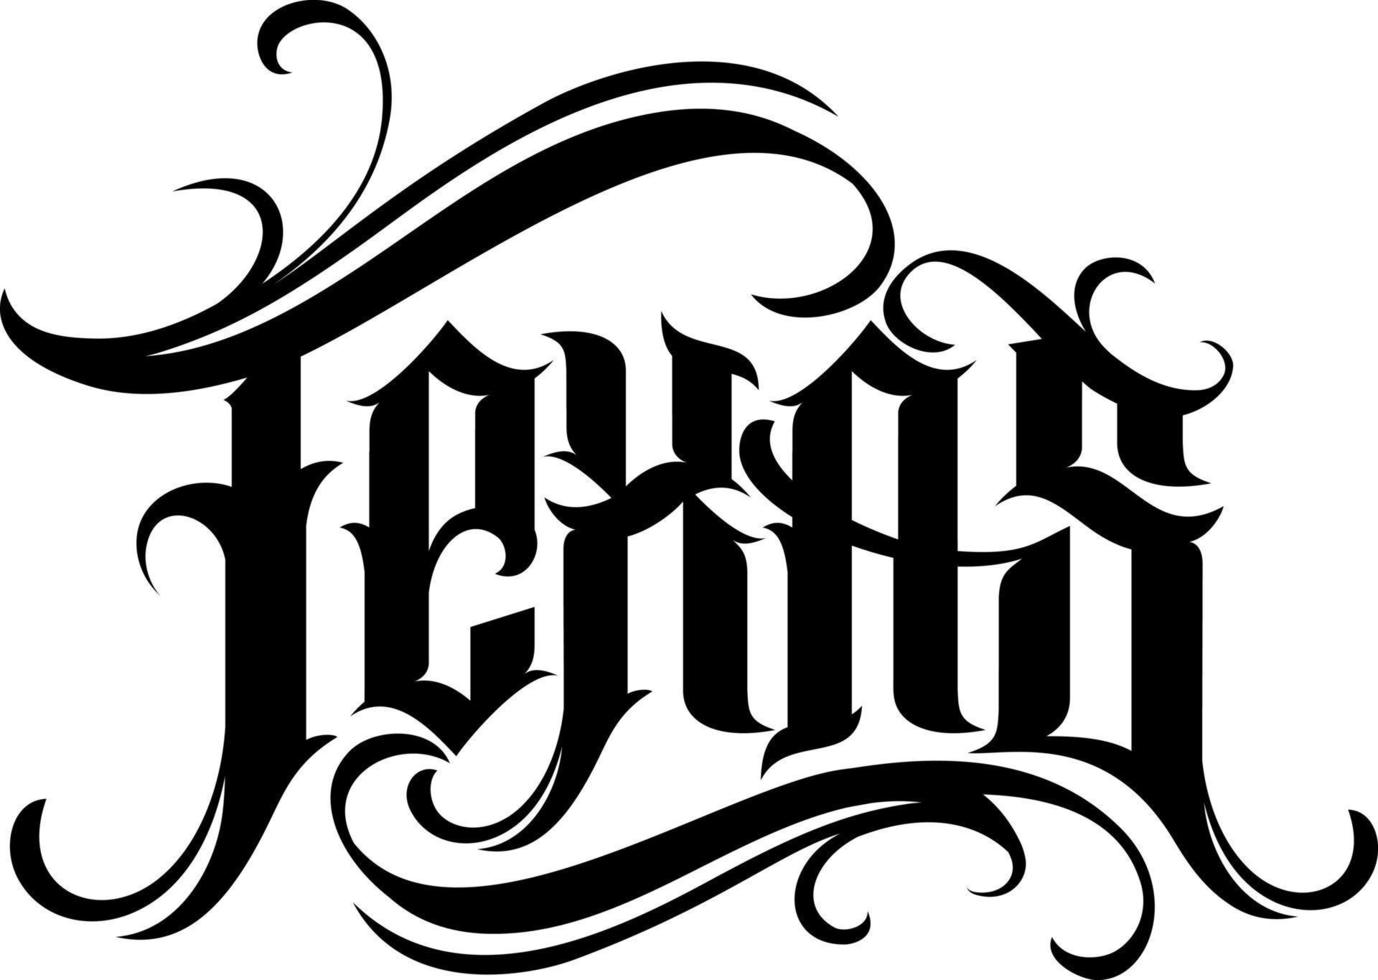 Texas lettering in tattoo style. Design element vector